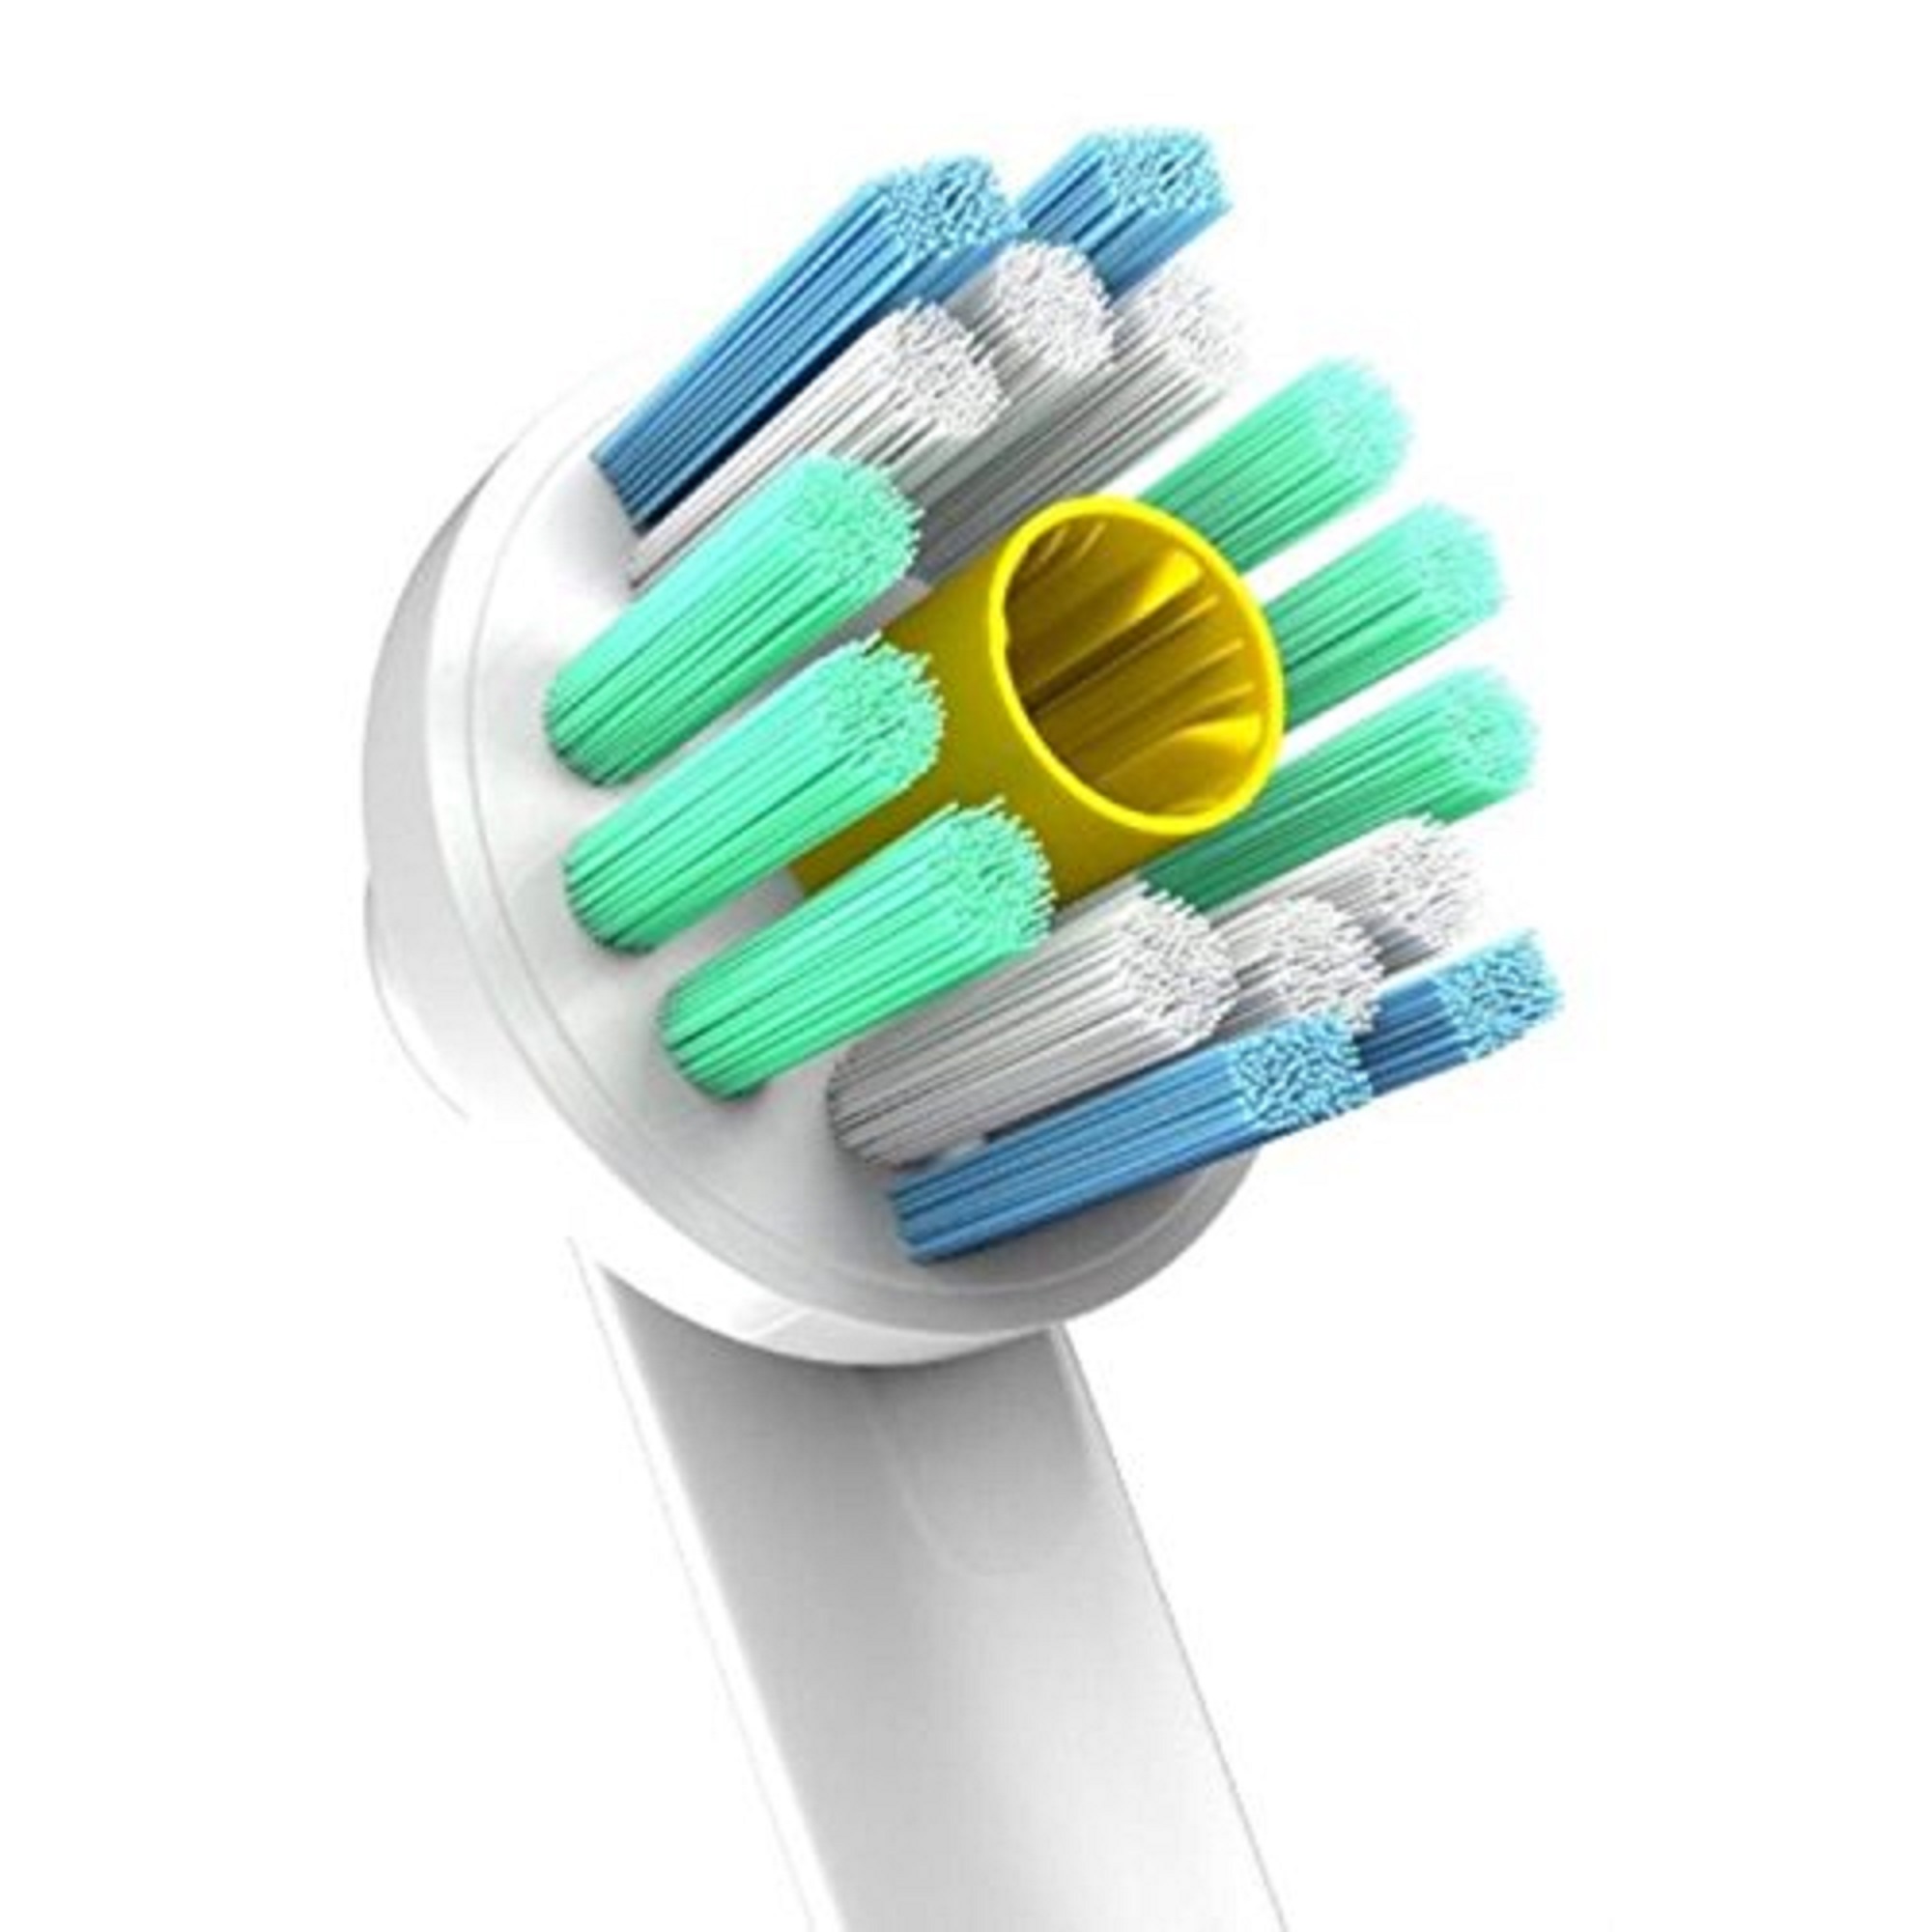 Pearl Enterprises Replacement Brush Heads Compatible With Oral B - Pack of 12 Electric Toothbrush Assorted Heads Refill Fits Oralb Braun and More - image 5 of 9